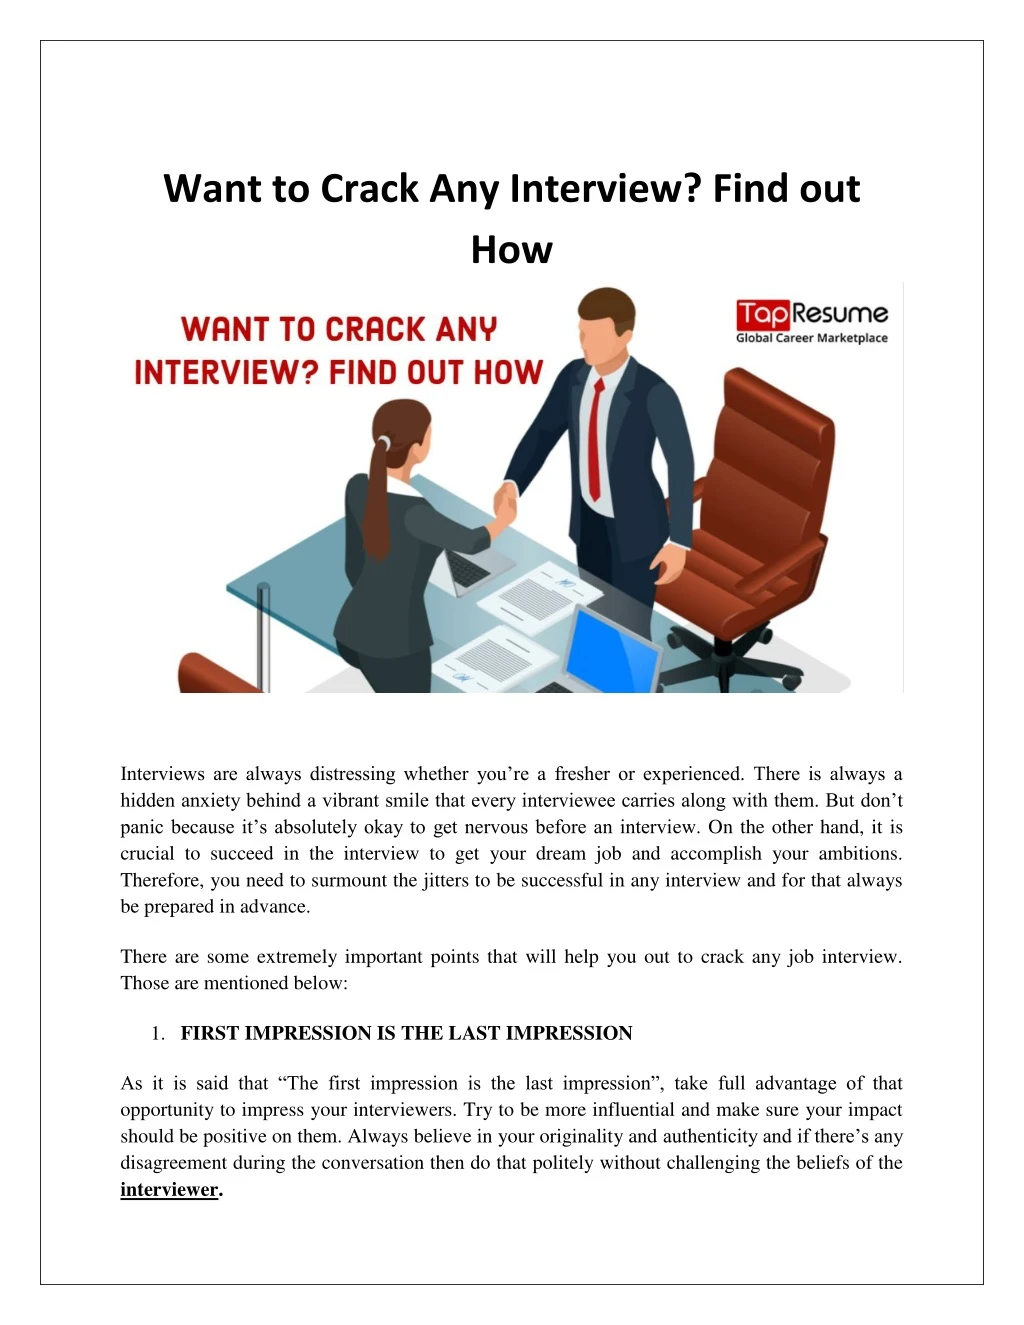 want to crack any interview find out how